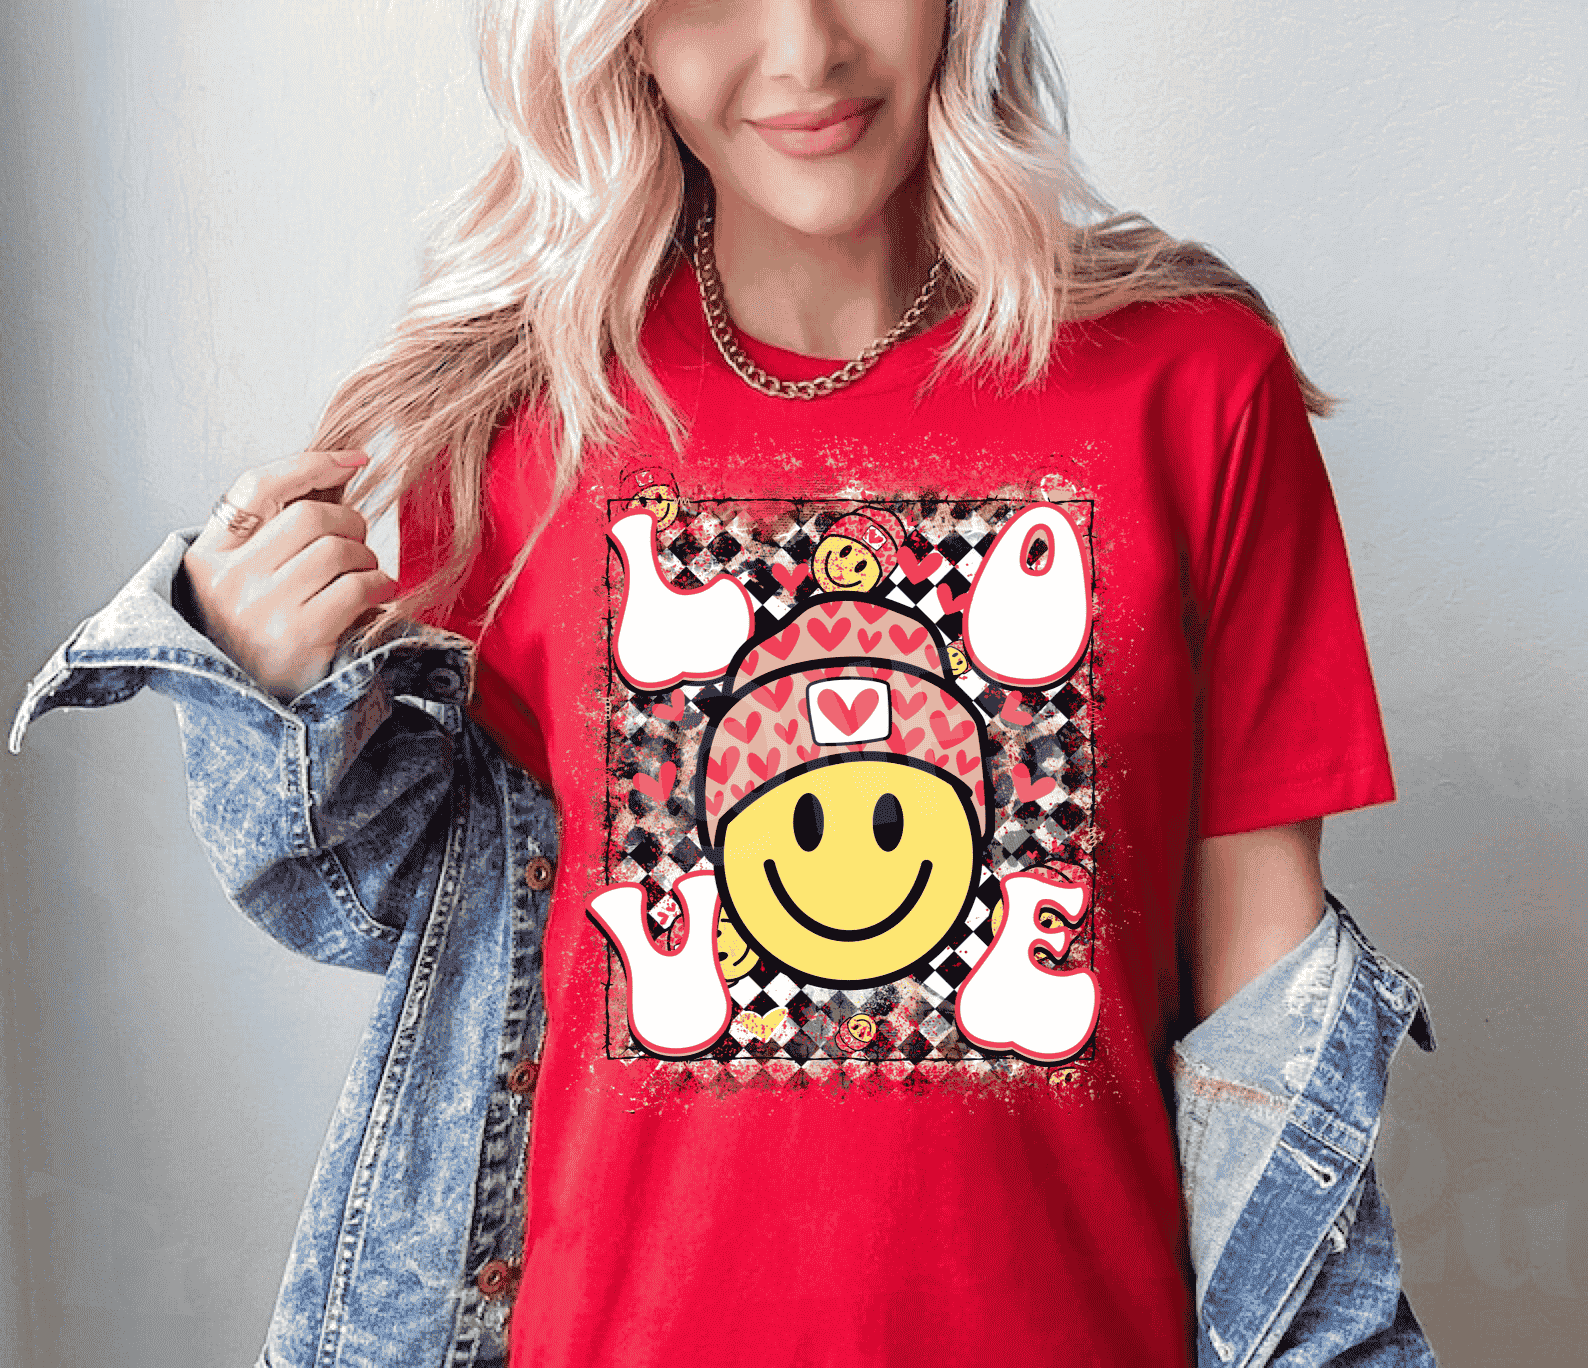 The Smiley Love Red - Valentine Graphic Women's Tee Shirt is an adorable and comfortable addition to your wardrobe. Made with soft cotton and featuring a bright smiley face design, this tee is sure to spread joy wherever you go. 